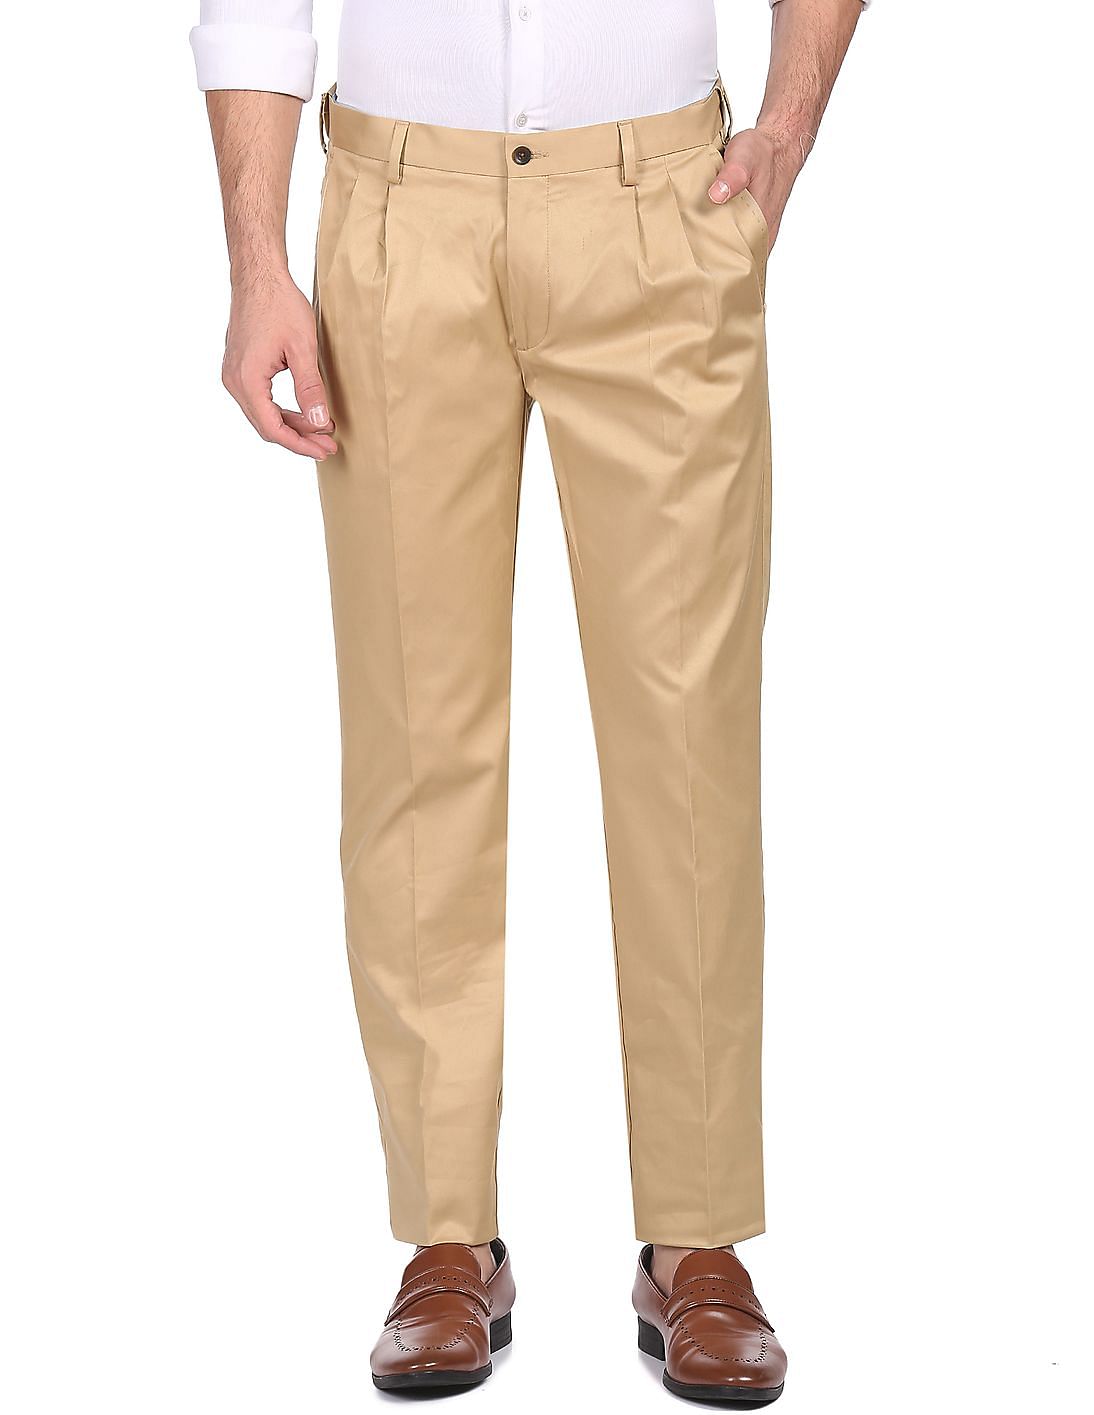 Buy Louis Raphael Men's Rosso Pleated Easy Care Solid Dress Pant with  Hidden Flex, Tan, 29x30 at .in